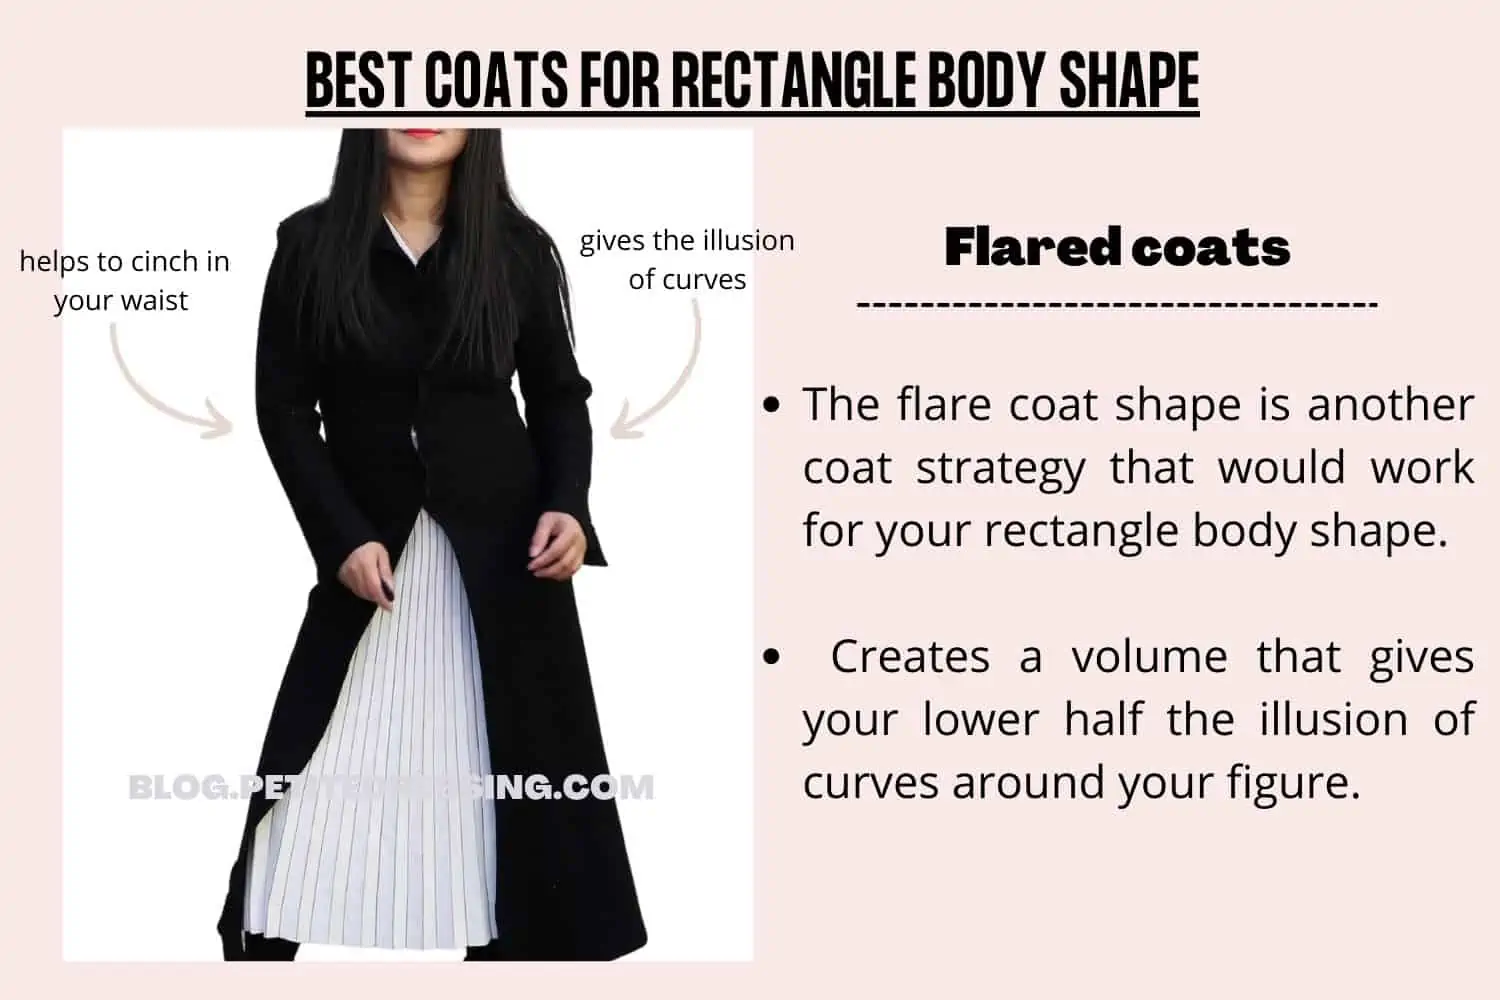 The Comprehensive Coat Guide for Rectangle Body Type - Petite Dressing